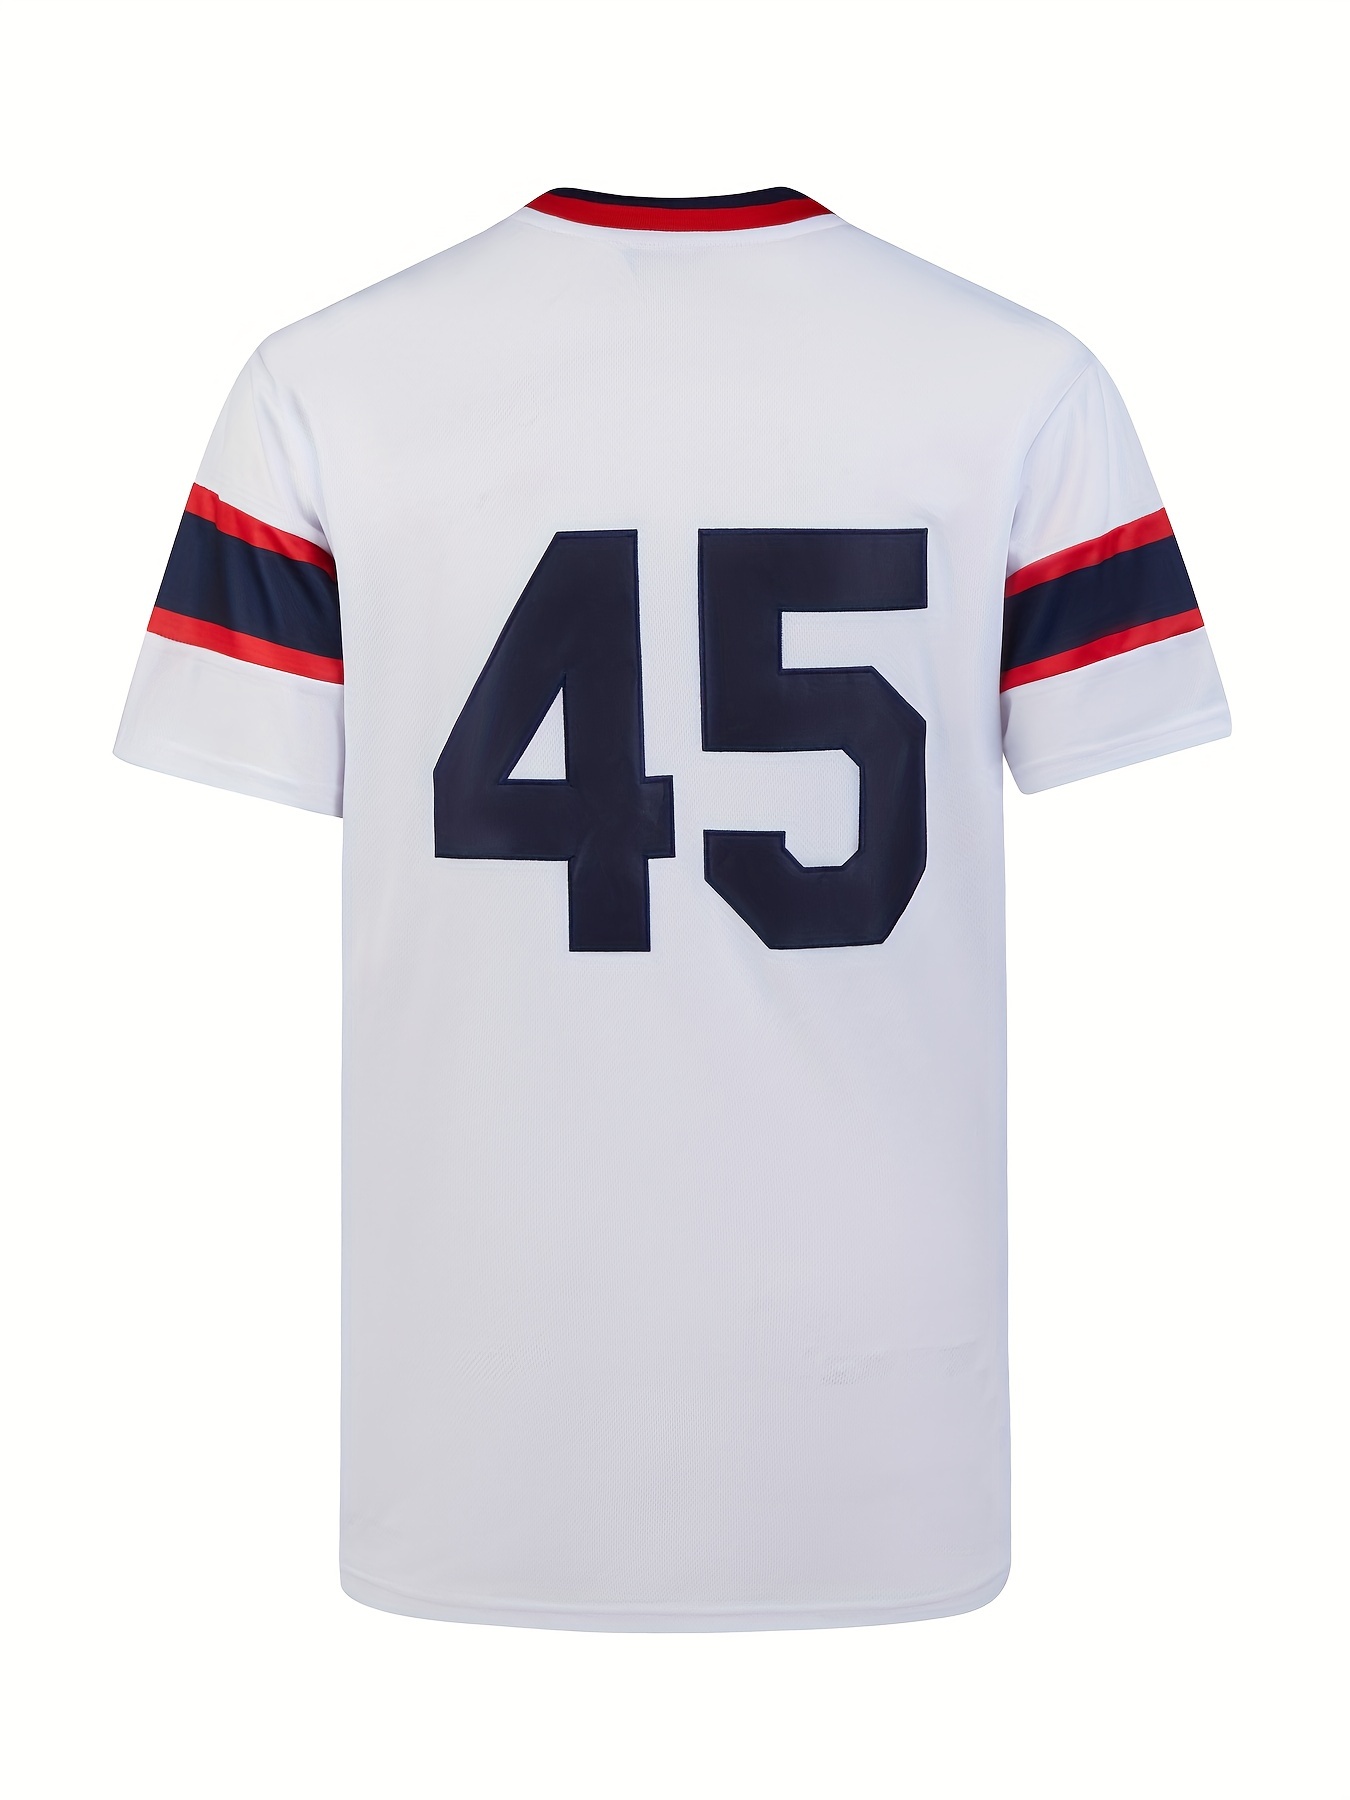 Men's Chicago #45 Embroidery Baseball Jersey, Classic Retro Design Short Sleeve Breathable Shirt for Training Competition,Temu